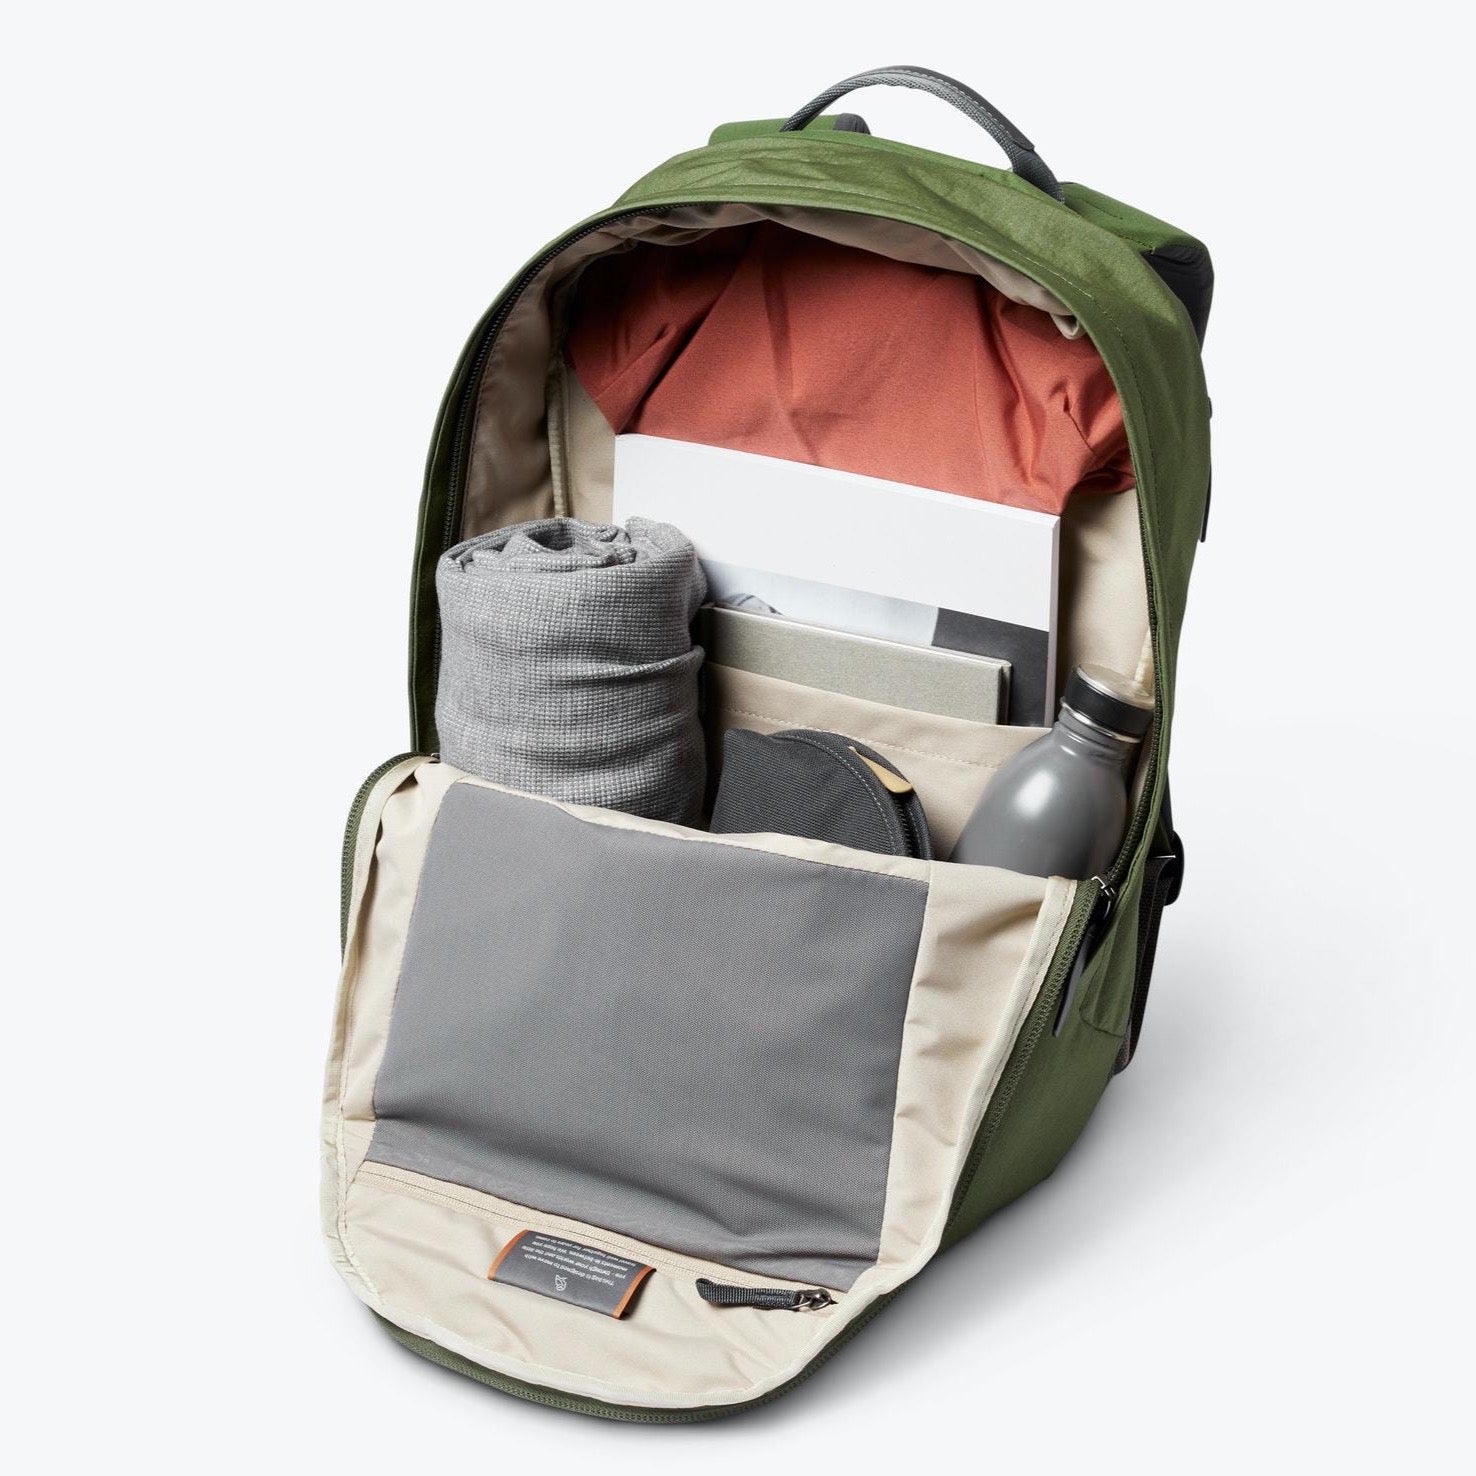 Bellroy Classic Backpack Plus 24L (Second Edition)